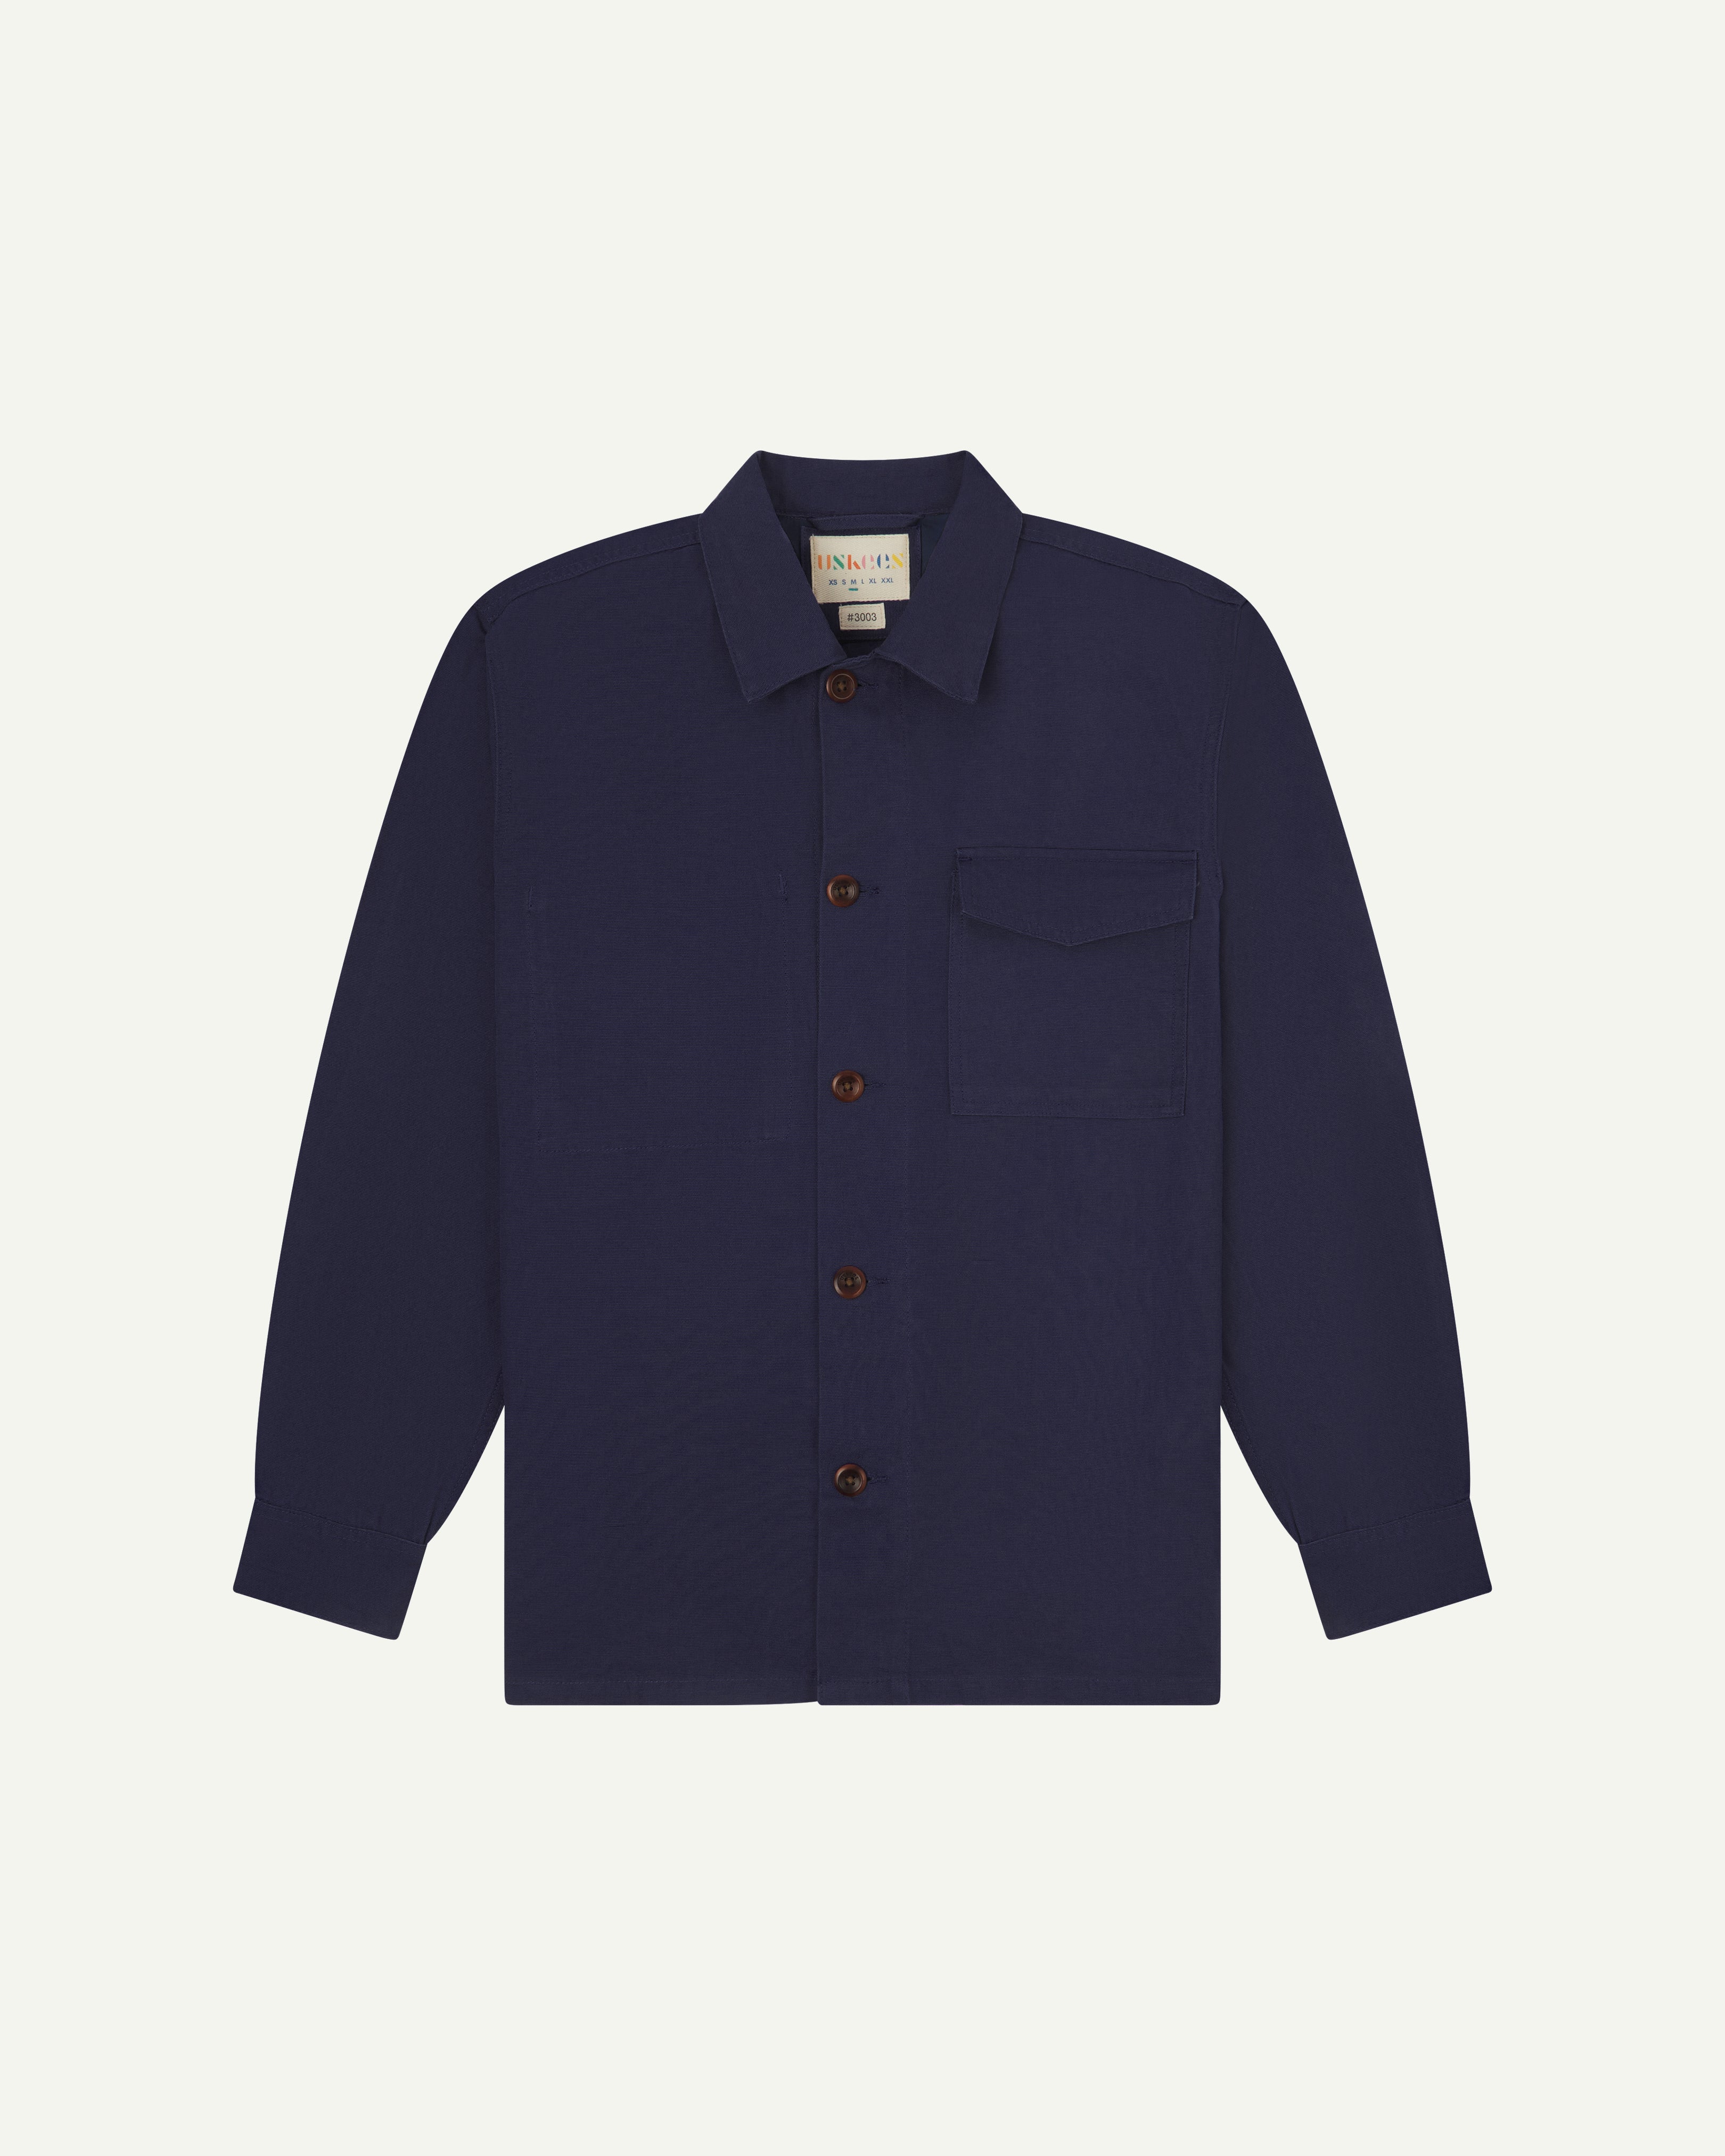 Front flat shot of dark blue #3003 workshirt from Uskees. Showing chest pocket with flap and corozo buttons.